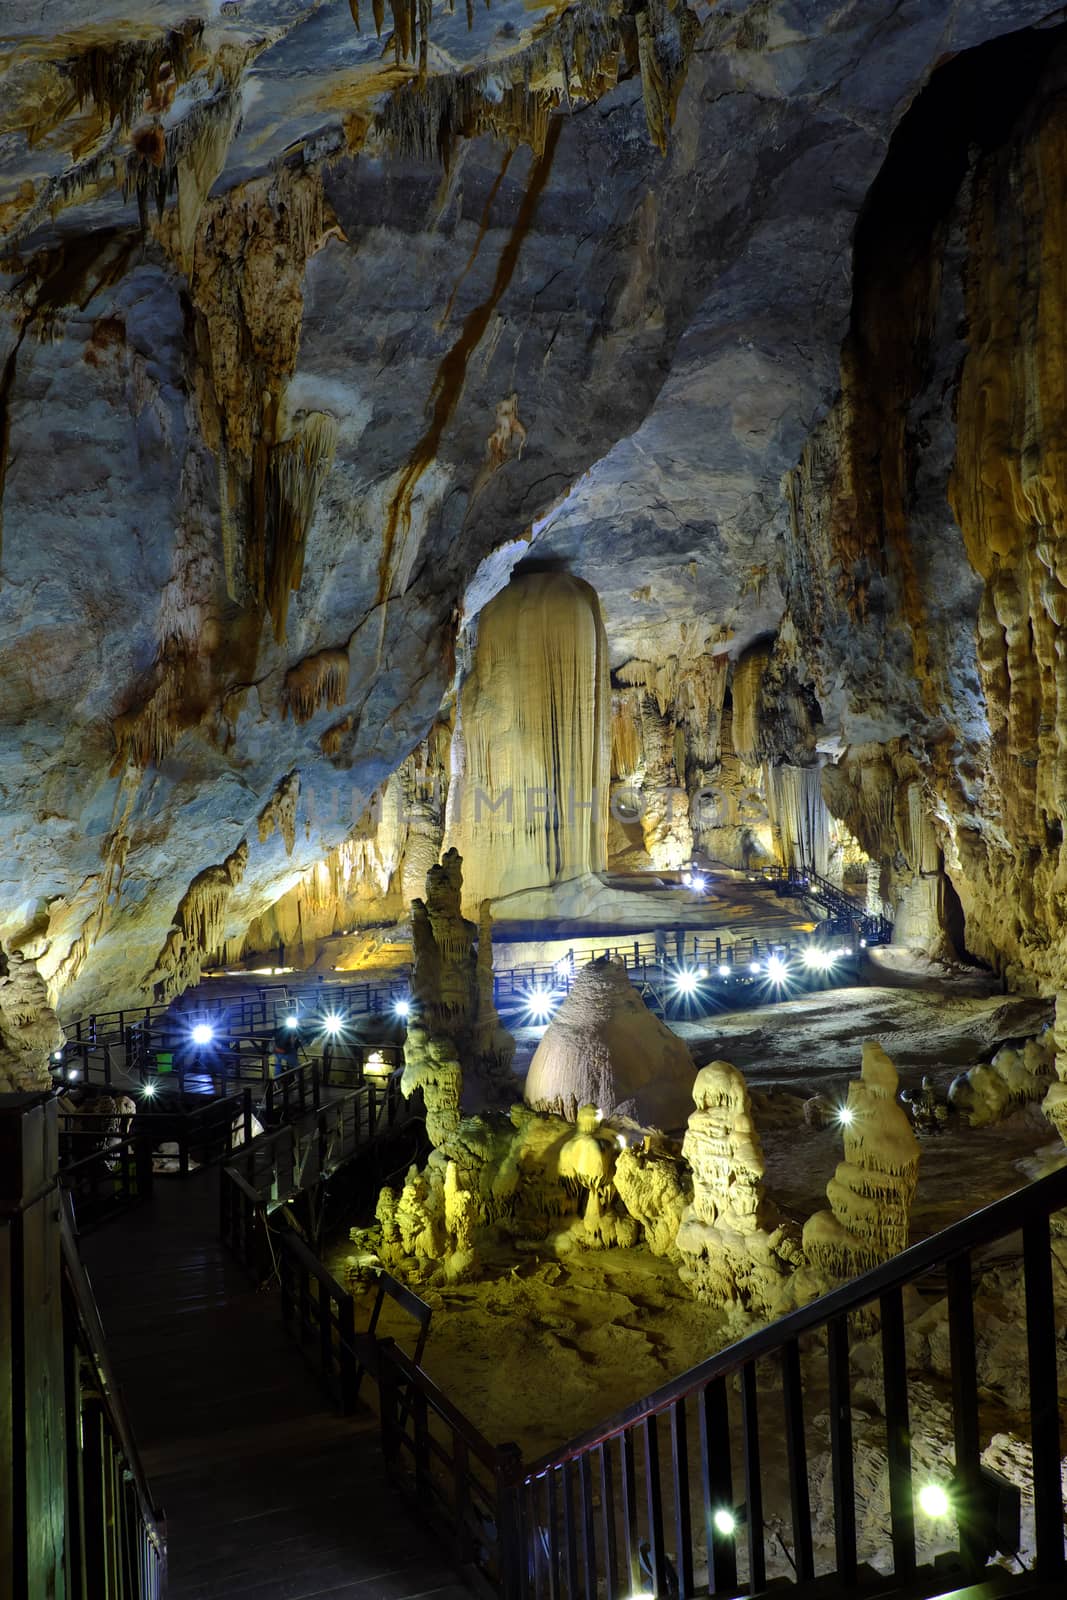 Paradise cave, Quang Binh, Vietnam travel, heritage by xuanhuongho